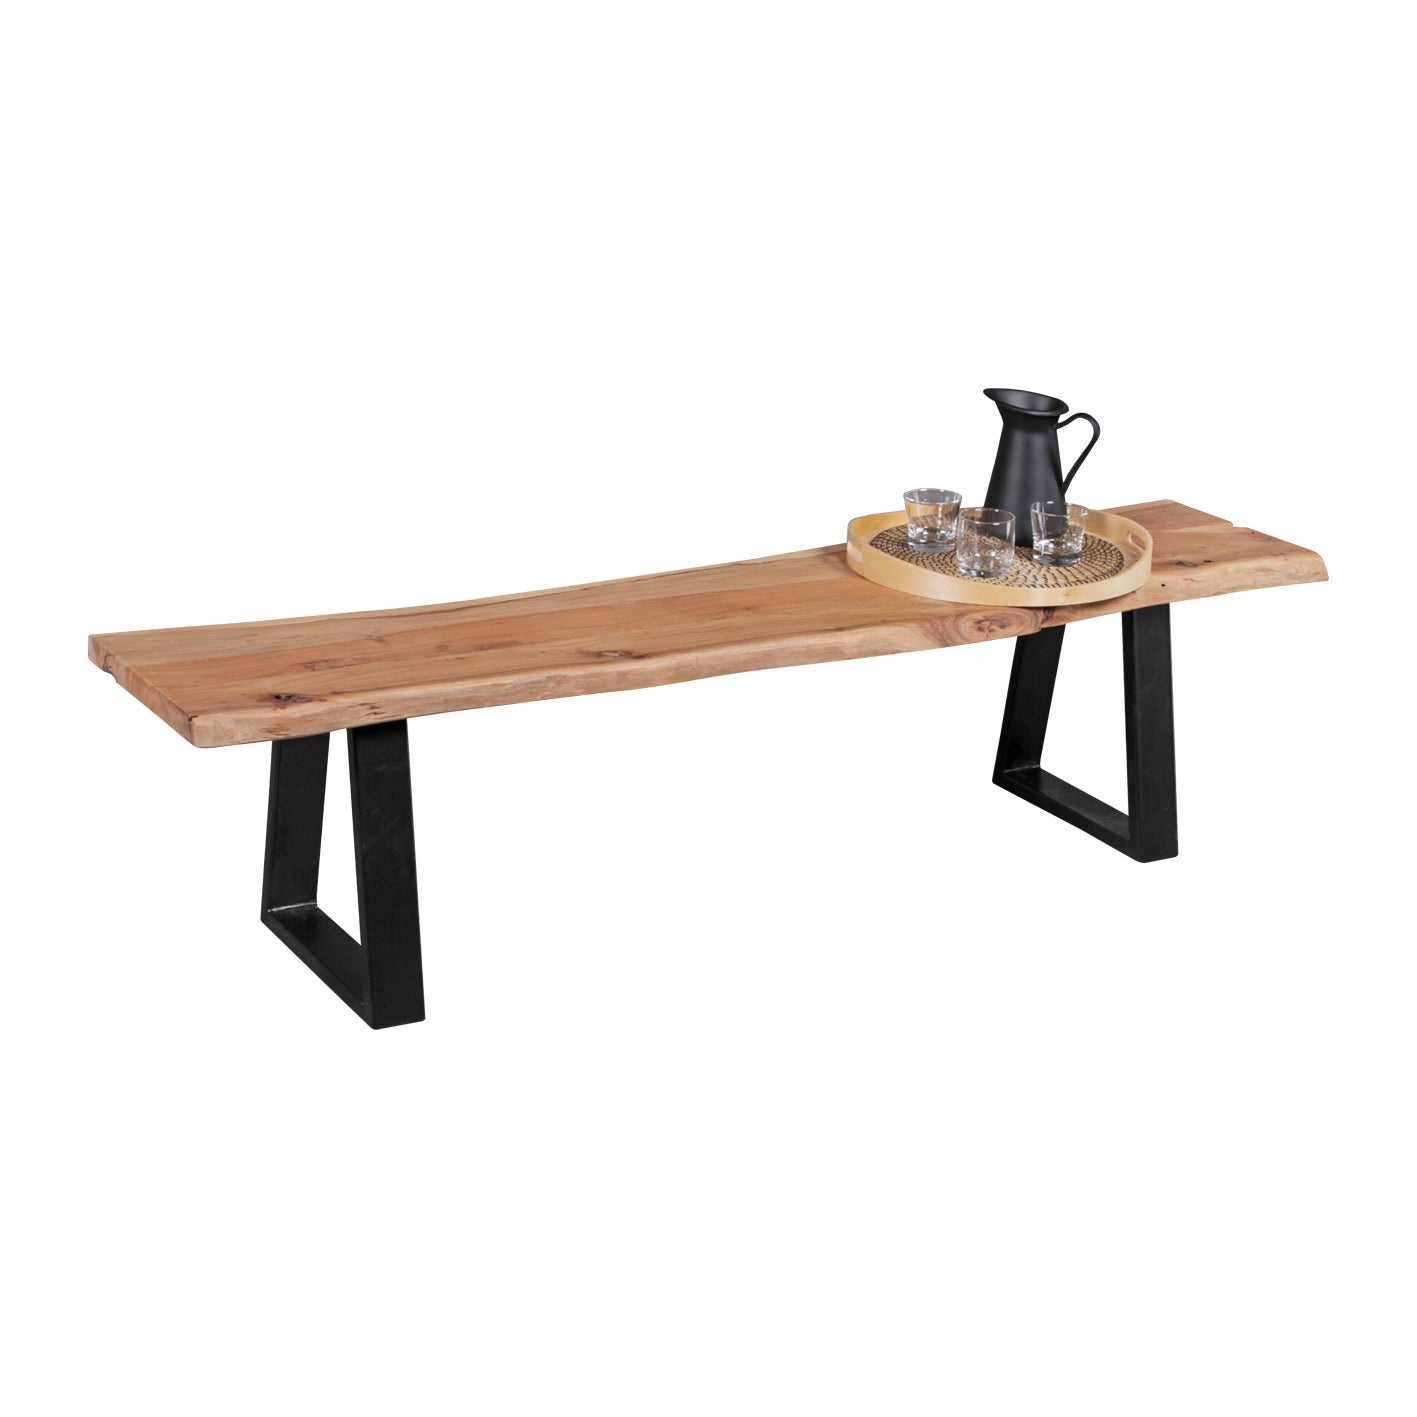 Nancy's Kanab Dining Room Bench - Solid Wooden Bench - Solid Wooden Acacia - Wood - Kitchen Bench - 160/180 cm